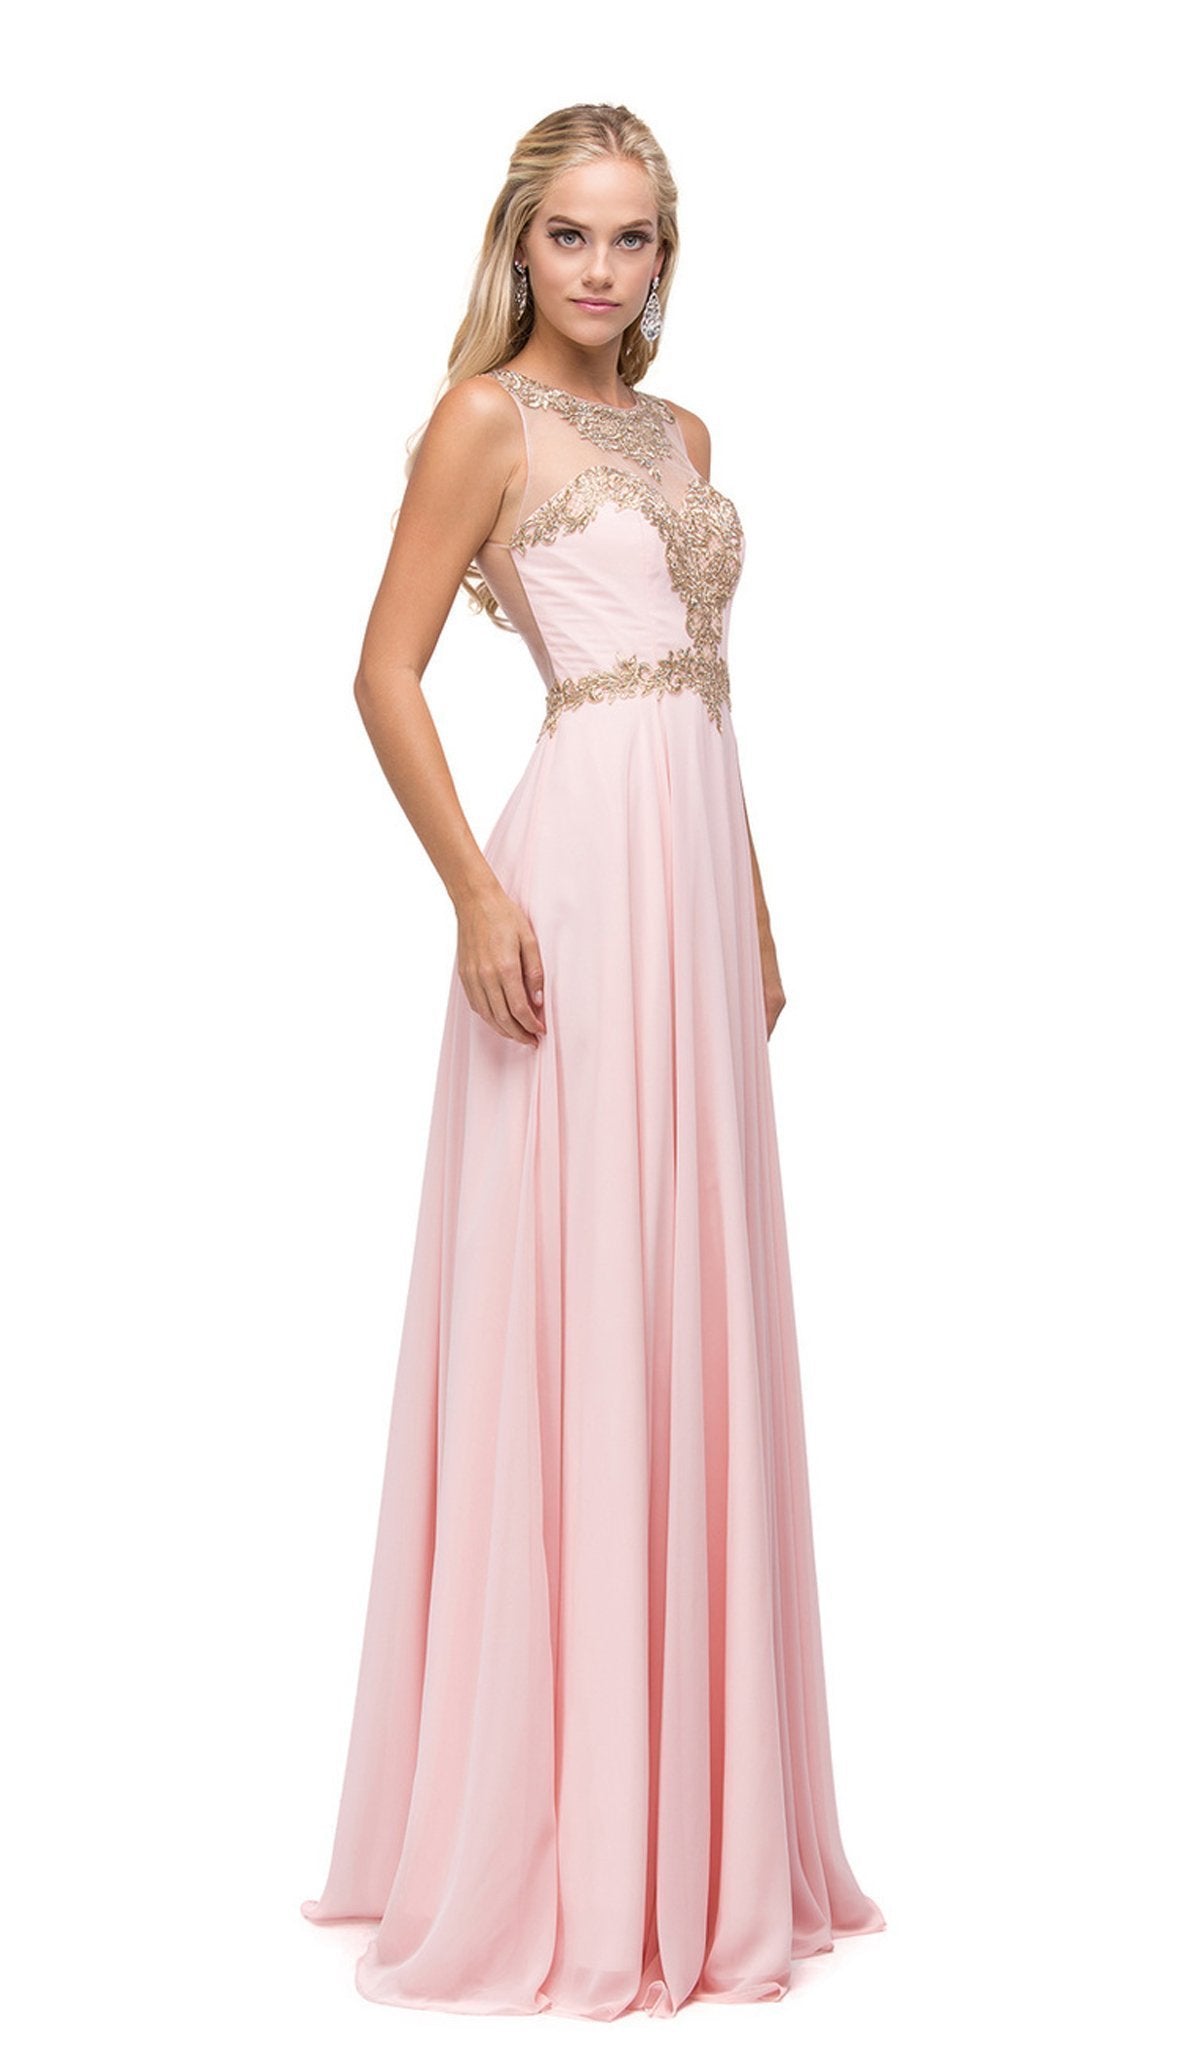 Dancing Queen - 9764 Gilded Lace Illusion A-Line Prom Dress Special Occasion Dress XS / Blush